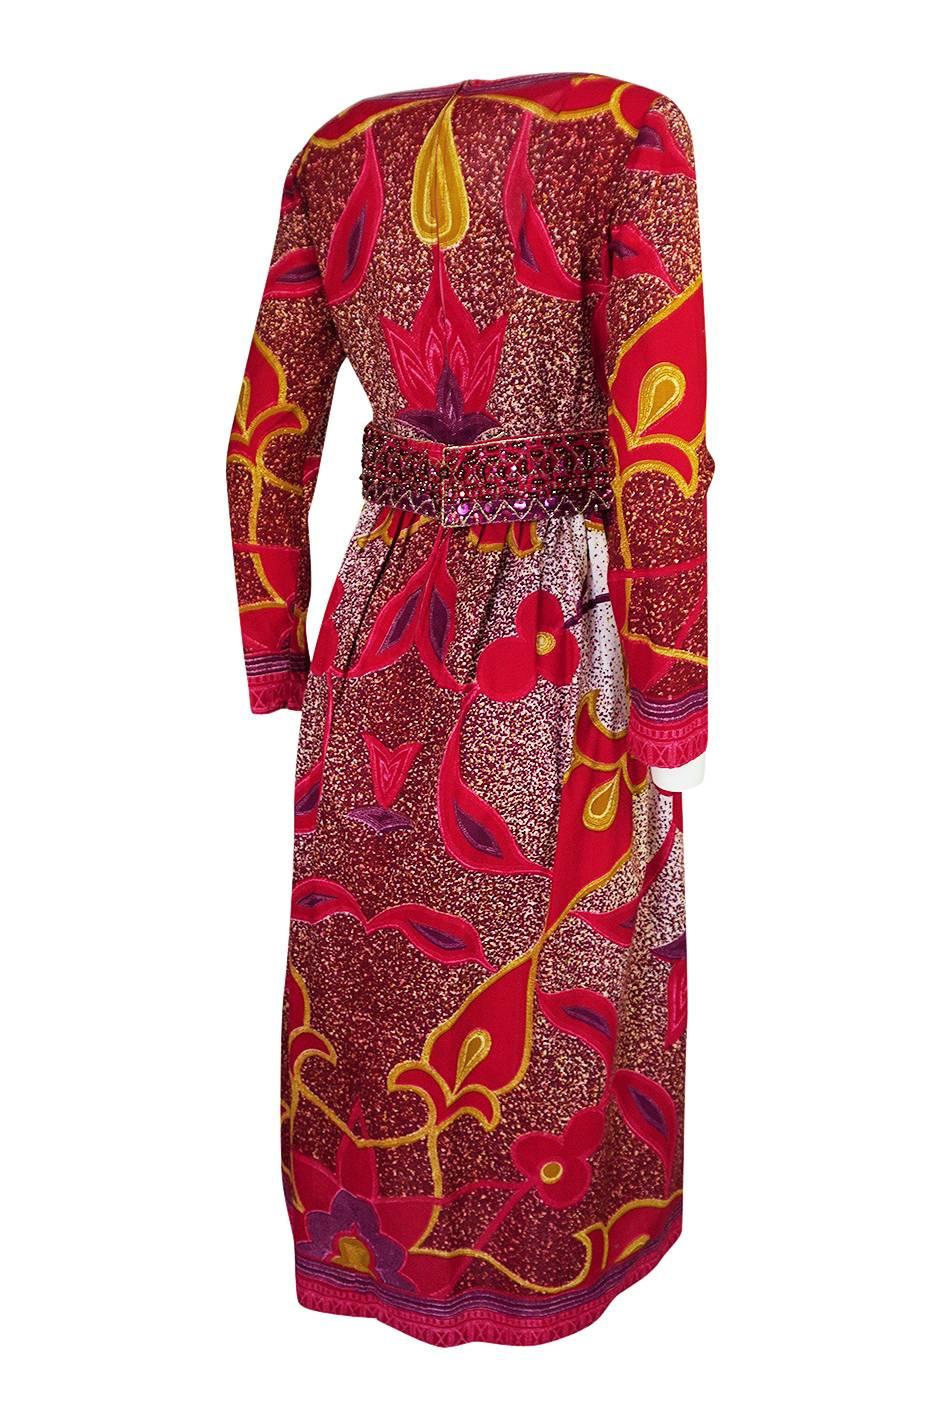 Elinor Simmons designed for the Malcolm Starr label from the early 1960s to 1972 and you can see her handiwork in this wonderful dress made from a batik print cotton. The print is a wonderful mix of pinks and reds that really pop. The print is hand